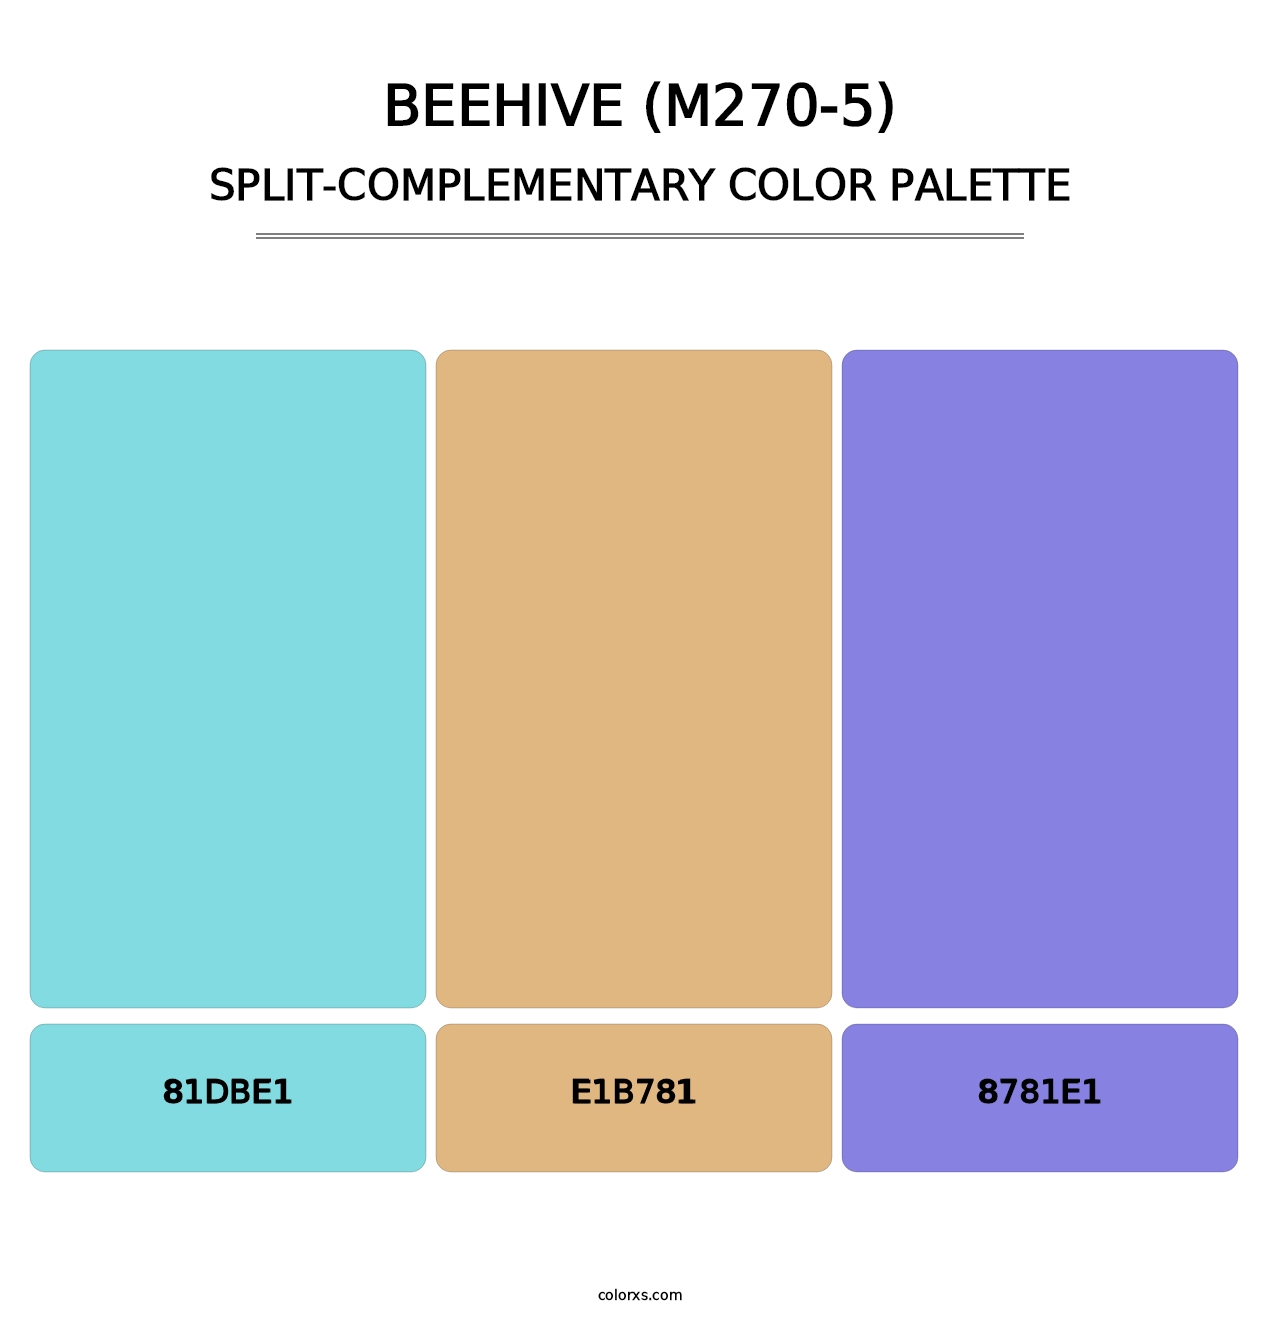 Beehive (M270-5) - Split-Complementary Color Palette